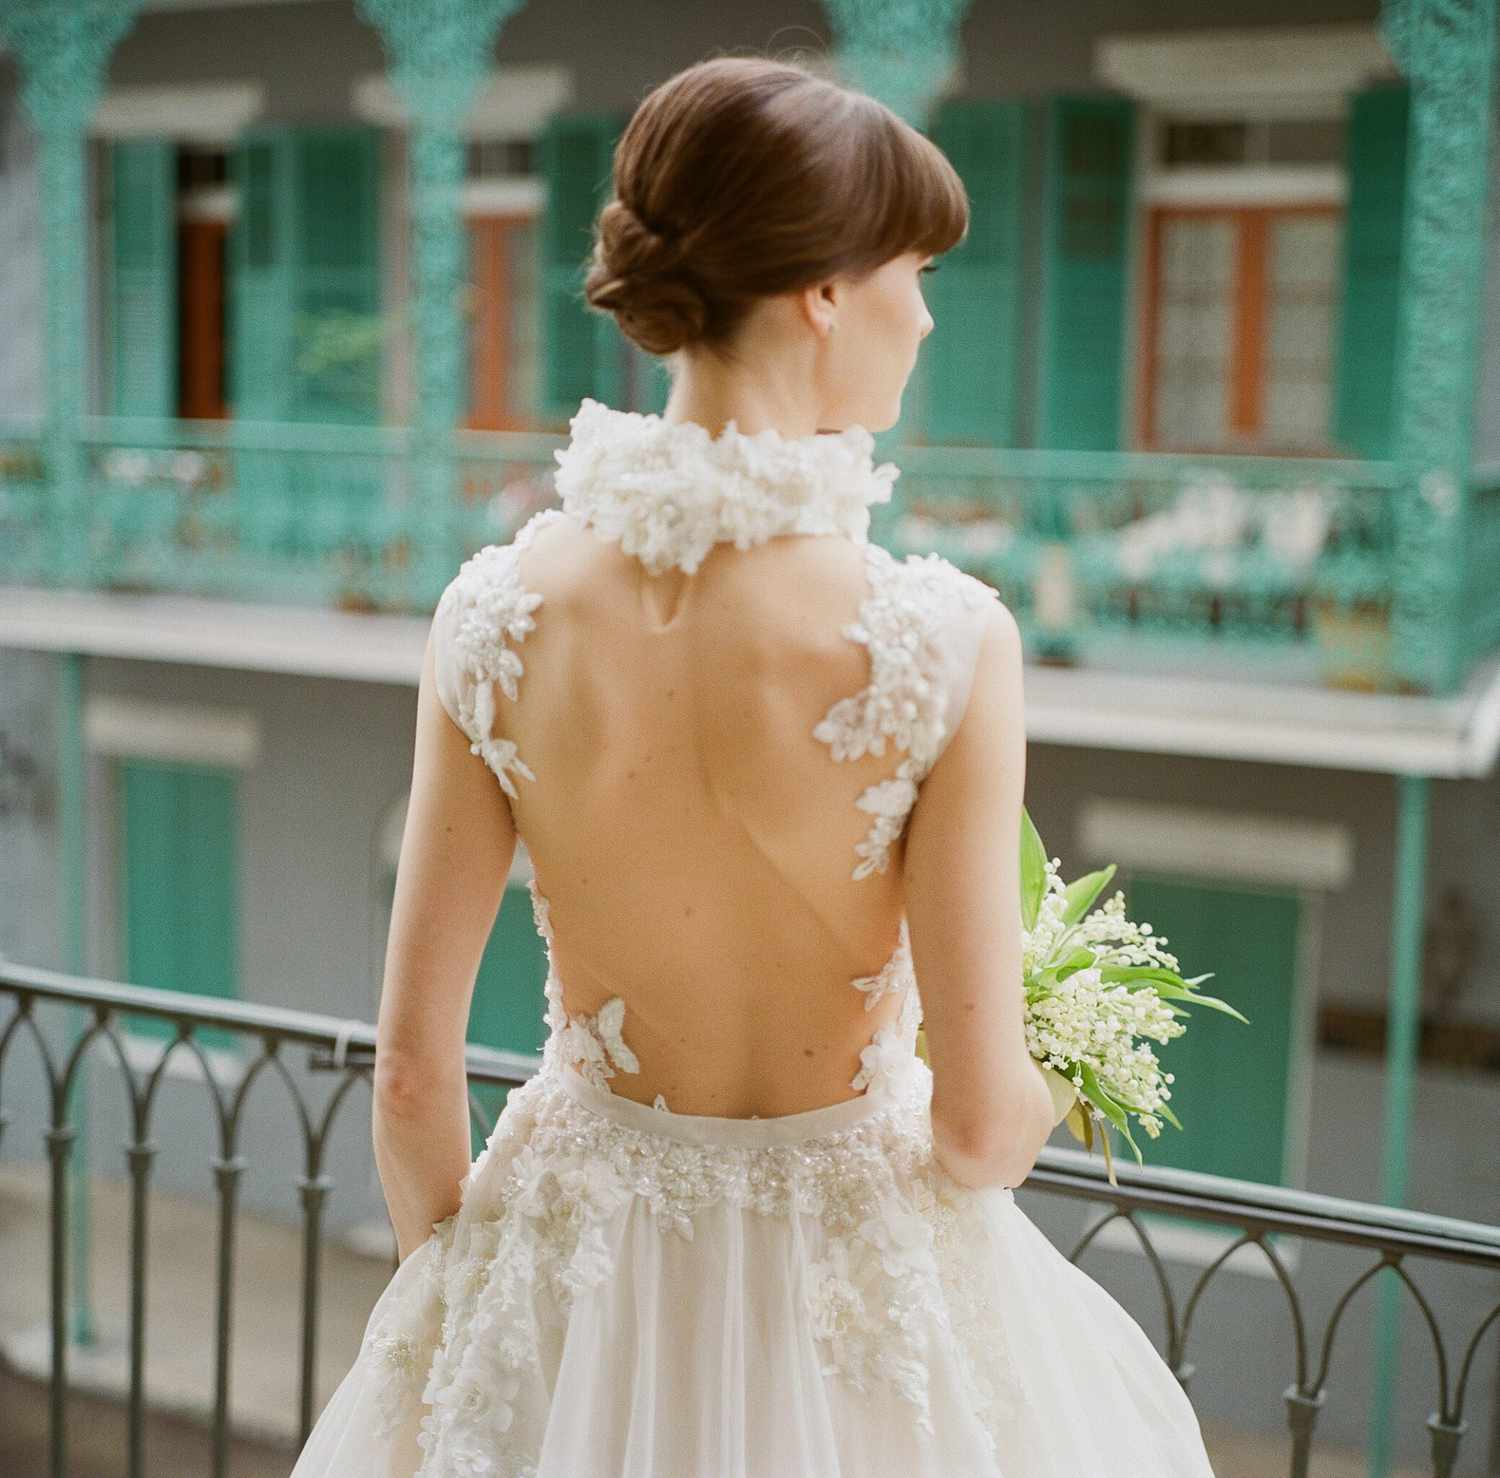 A Bride Wearing a Wedding Dress with a Dramatic Back Looking Over a Balcony